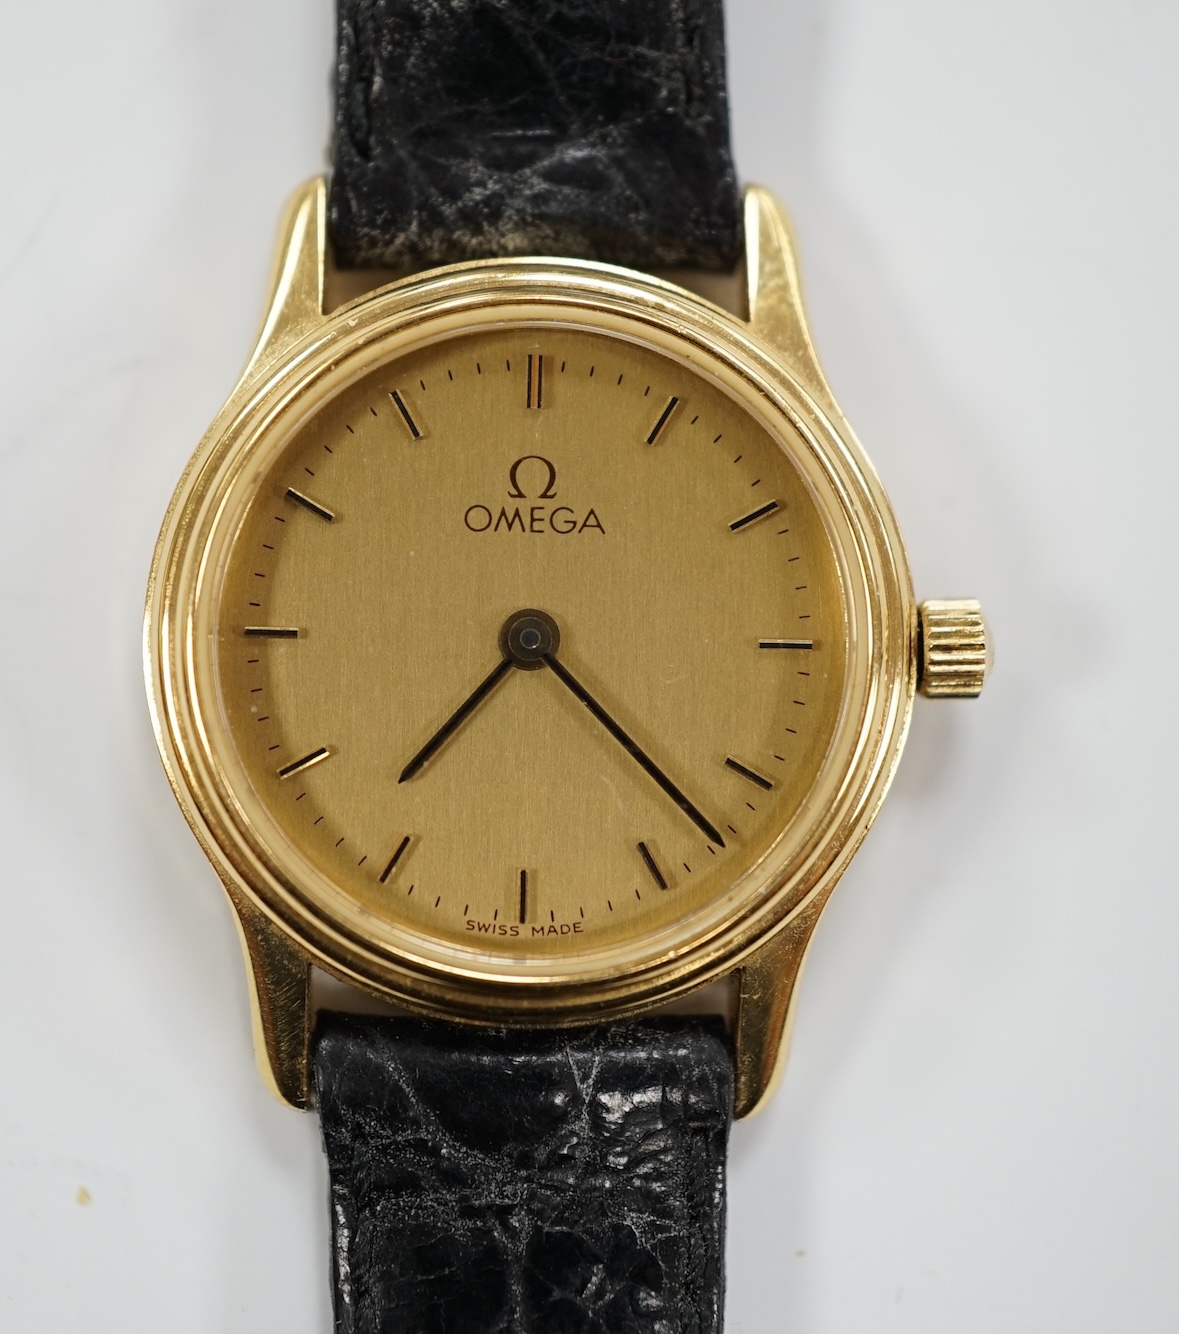 A lady's 18ct gold Omega quartz wrist watch, with case back inscription, on a leather strap with Omega buckle, with Omega box.